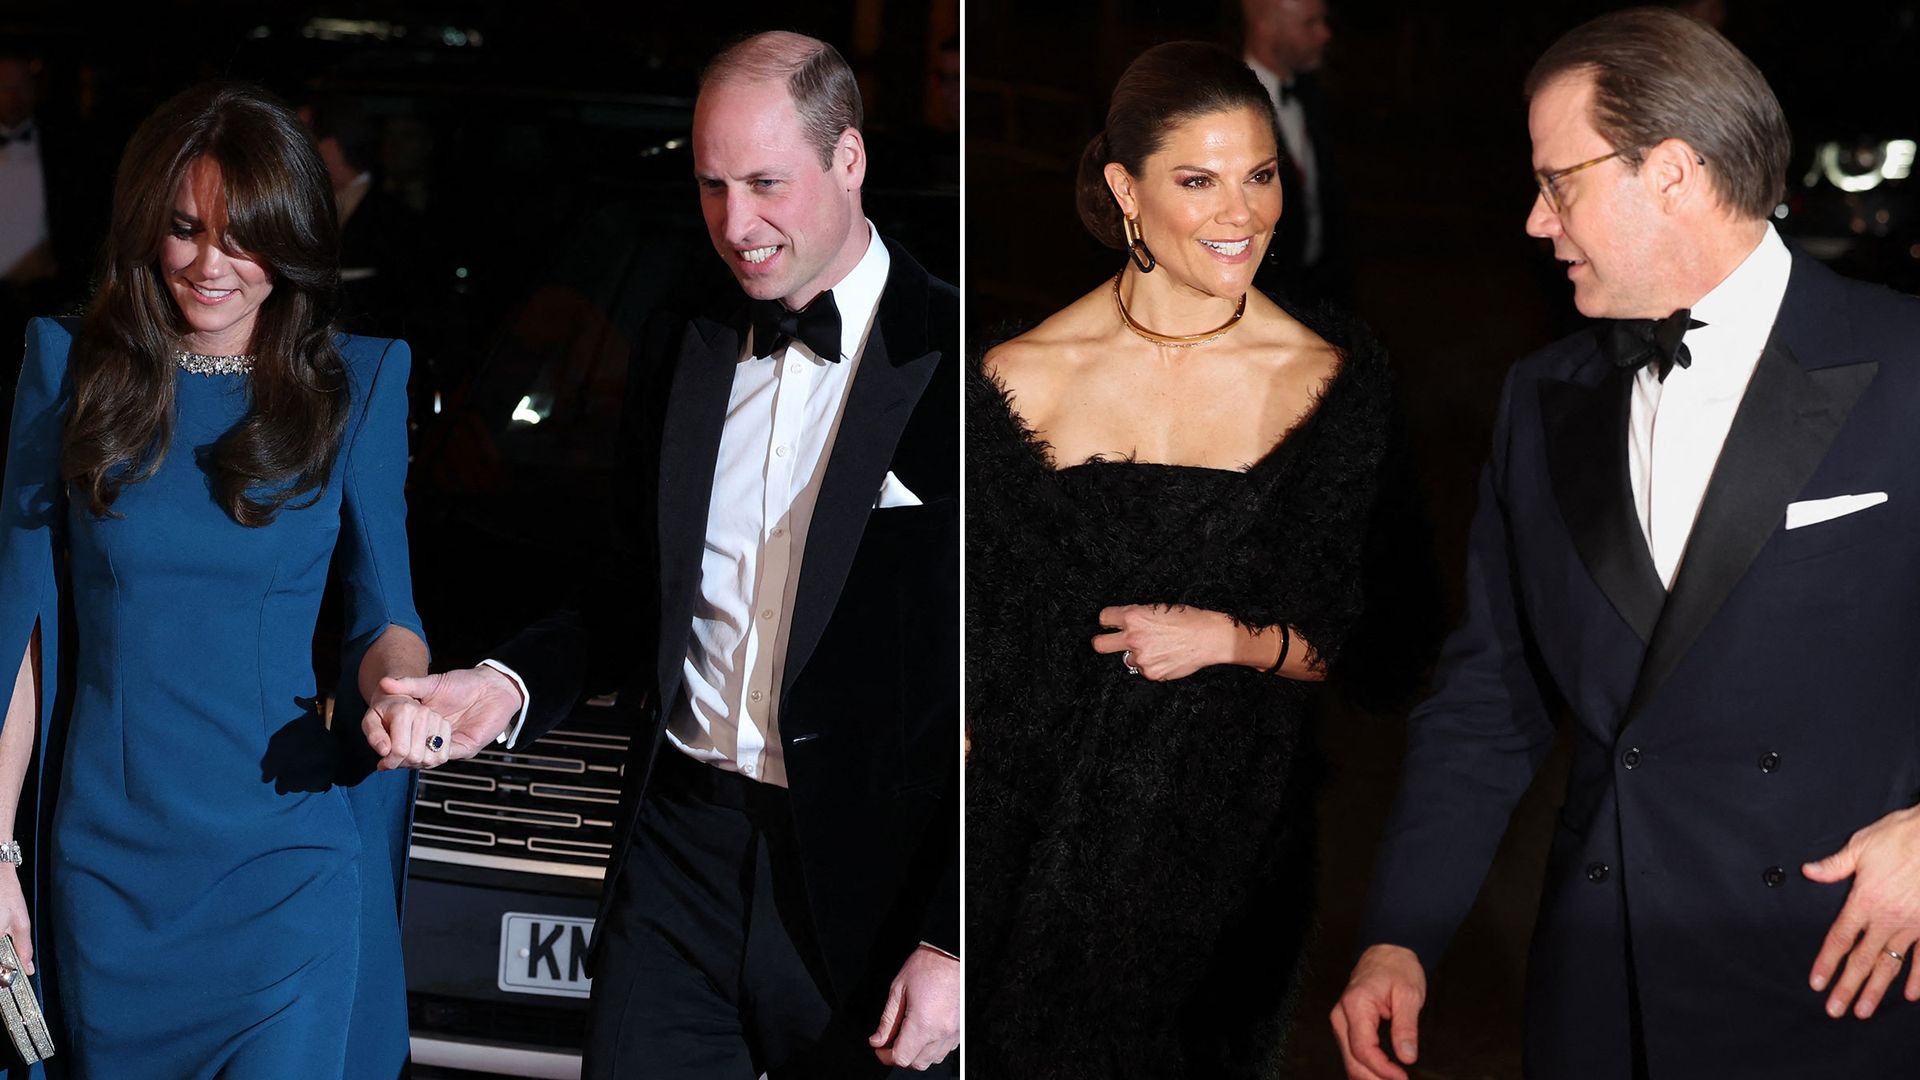 Split of William and Kate and Swedish royals at Royal Variety Performance